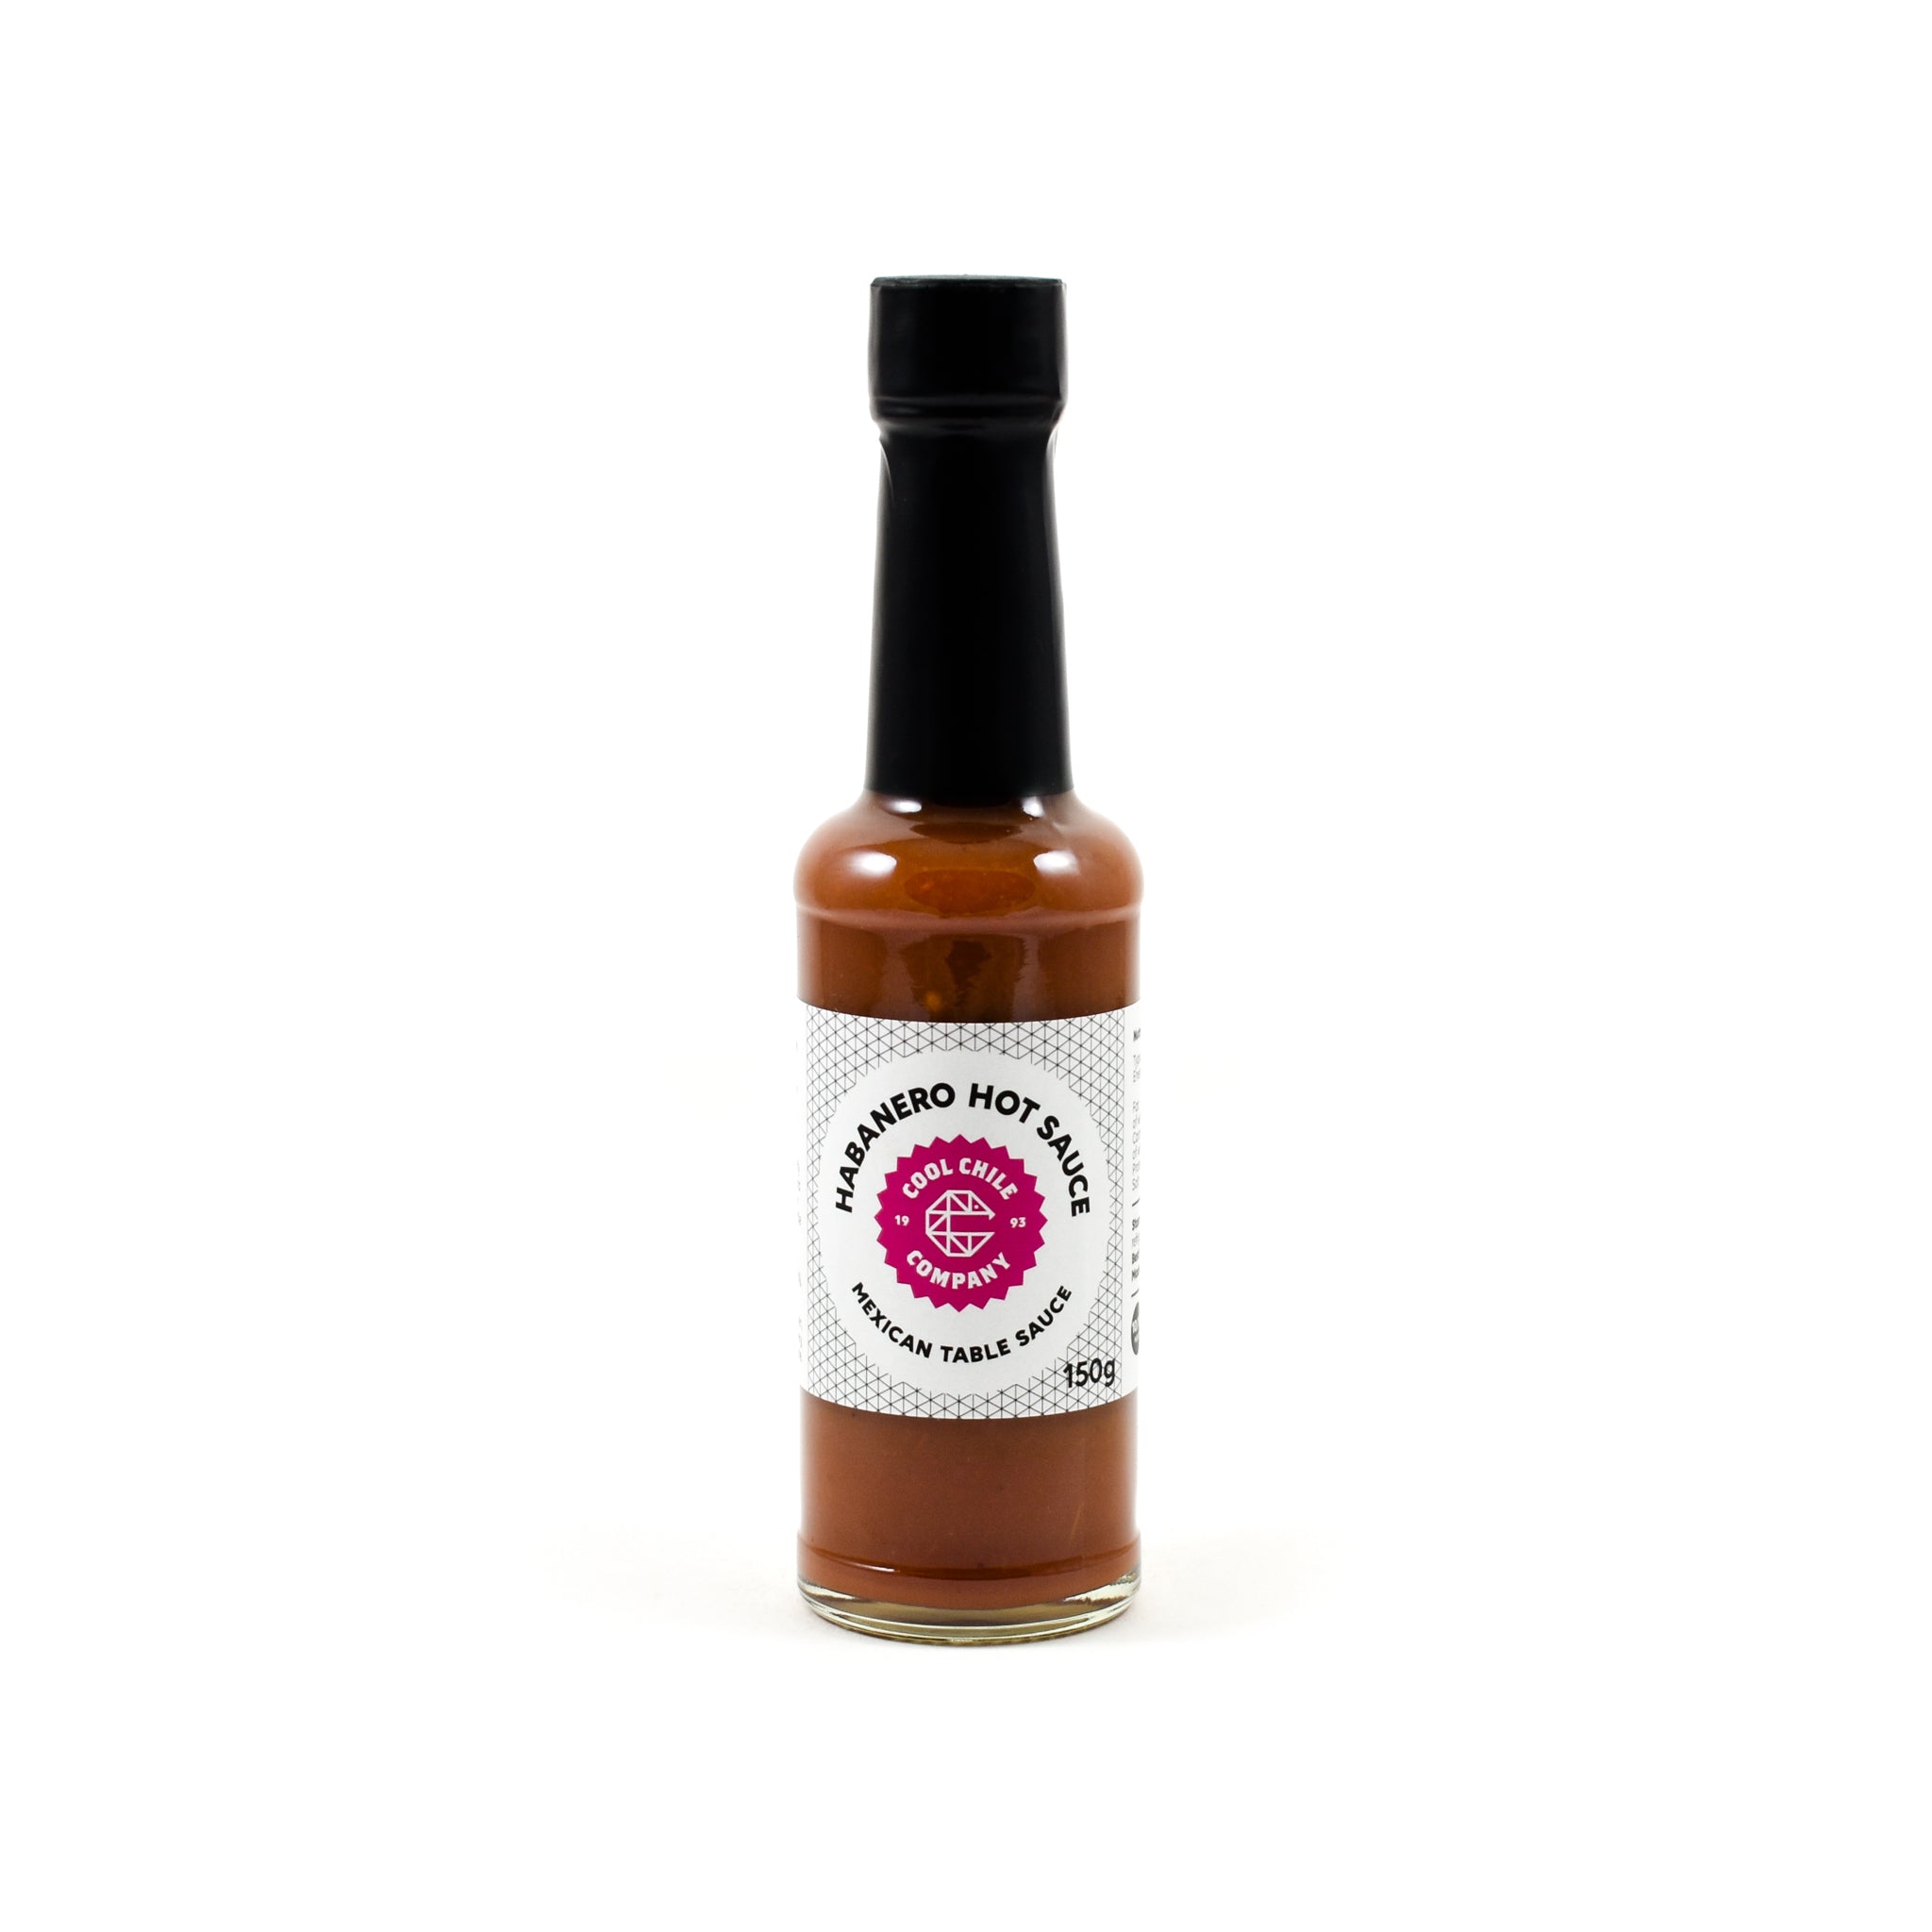 Cool Chile Co Habanero Hot Sauce 150g Ingredients Sauces & Condiments American Sauces & Condiments